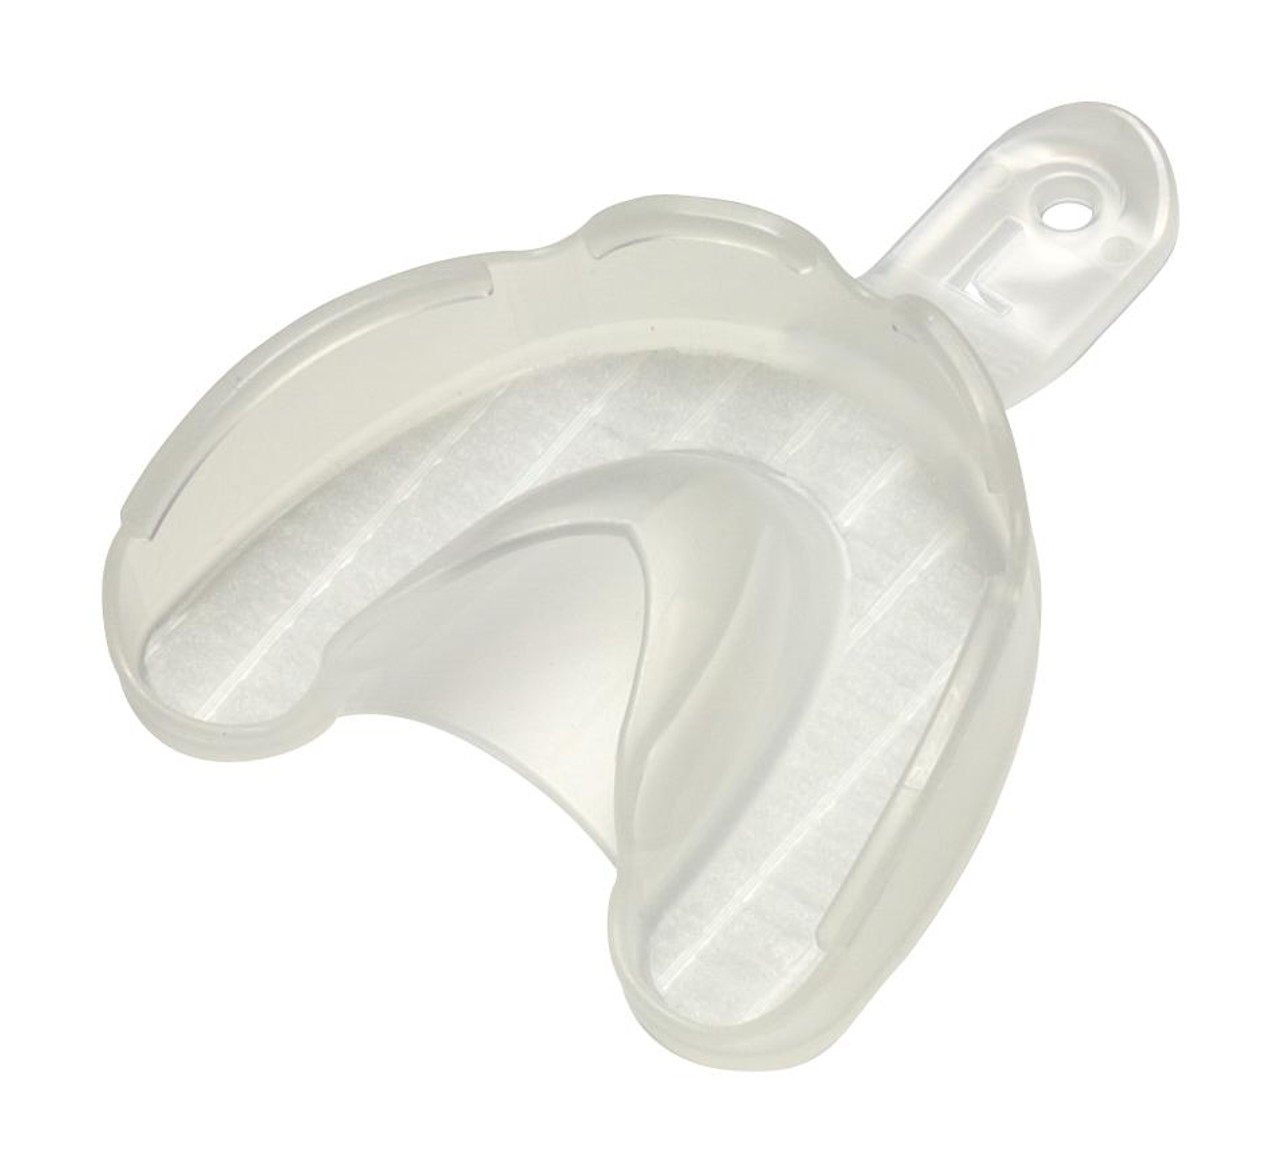 3M Impression Tray Size Large (L), Upper Refill, 71617